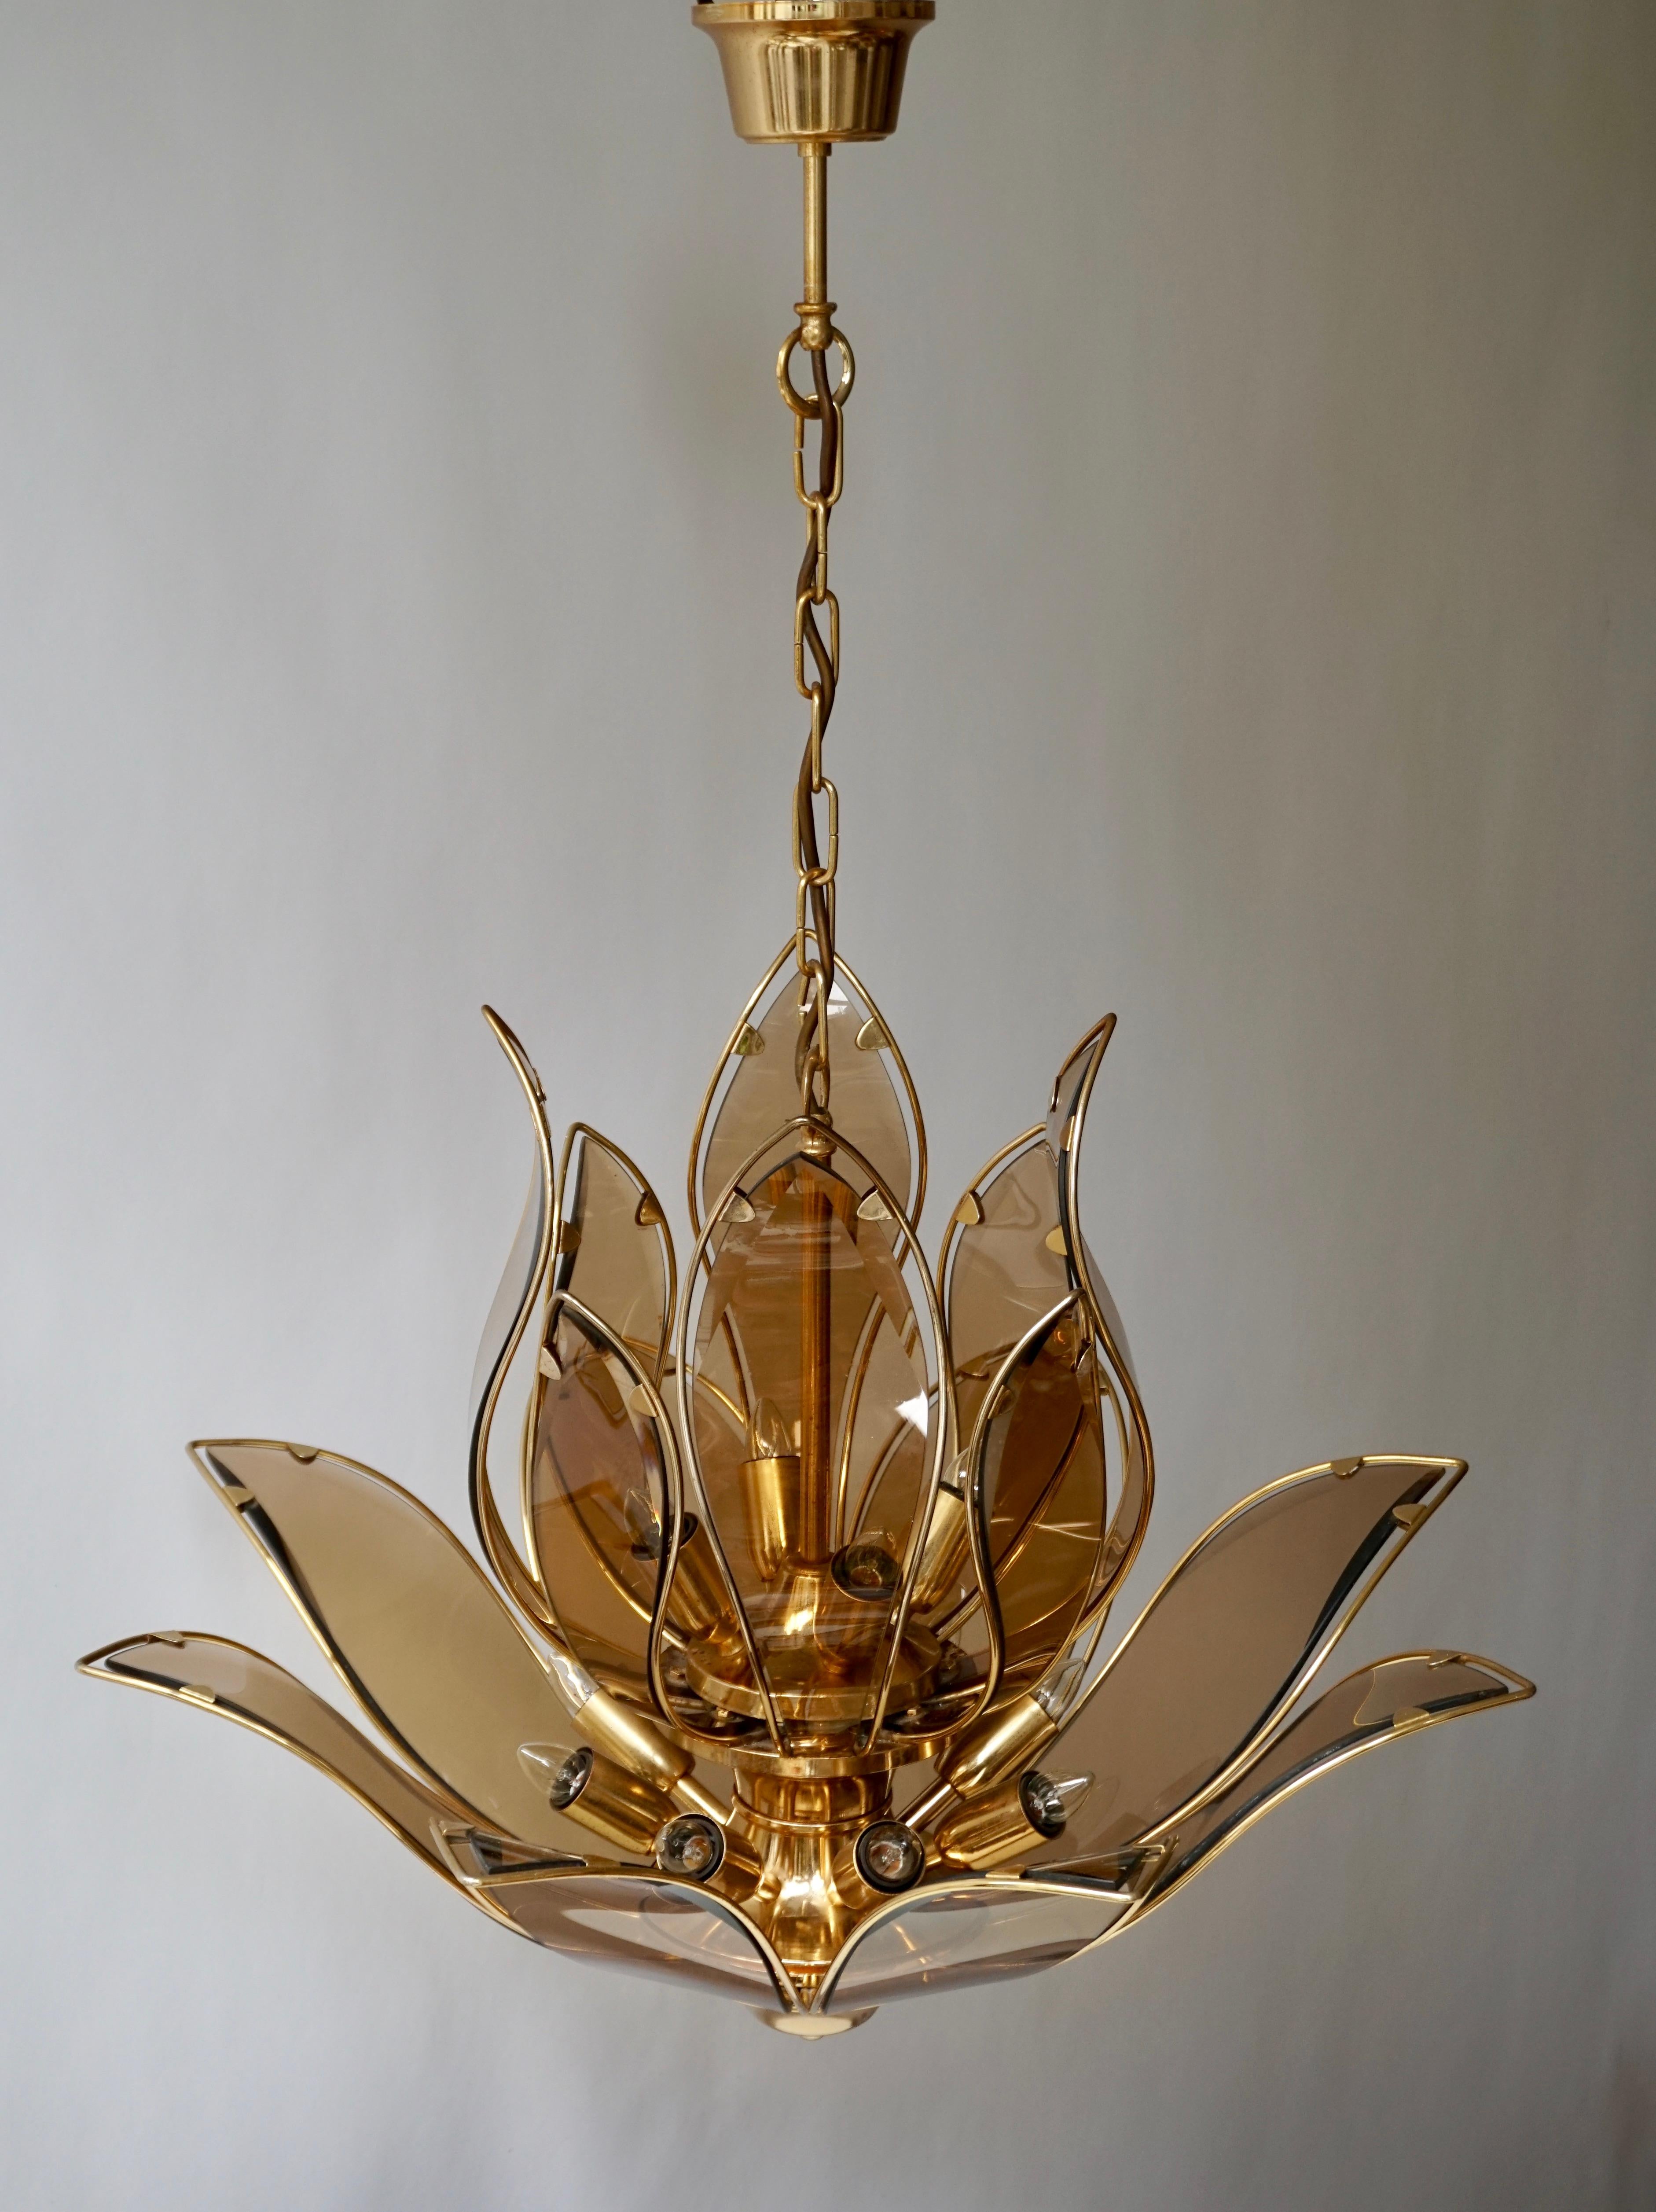 Hollywood Regency Chandelier in Brass and Glass